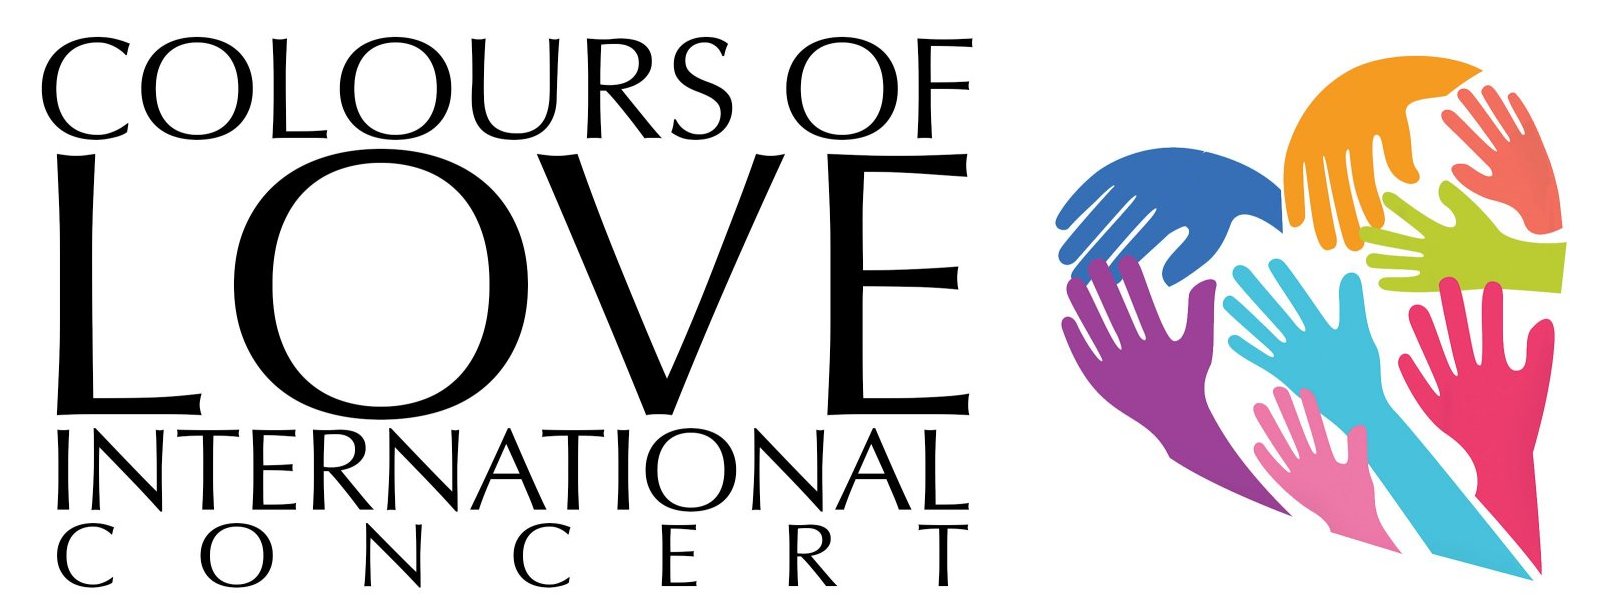 COL-LOGO-no-background-e1529145955979.png Google image from https://www.coloursoflove.ca/